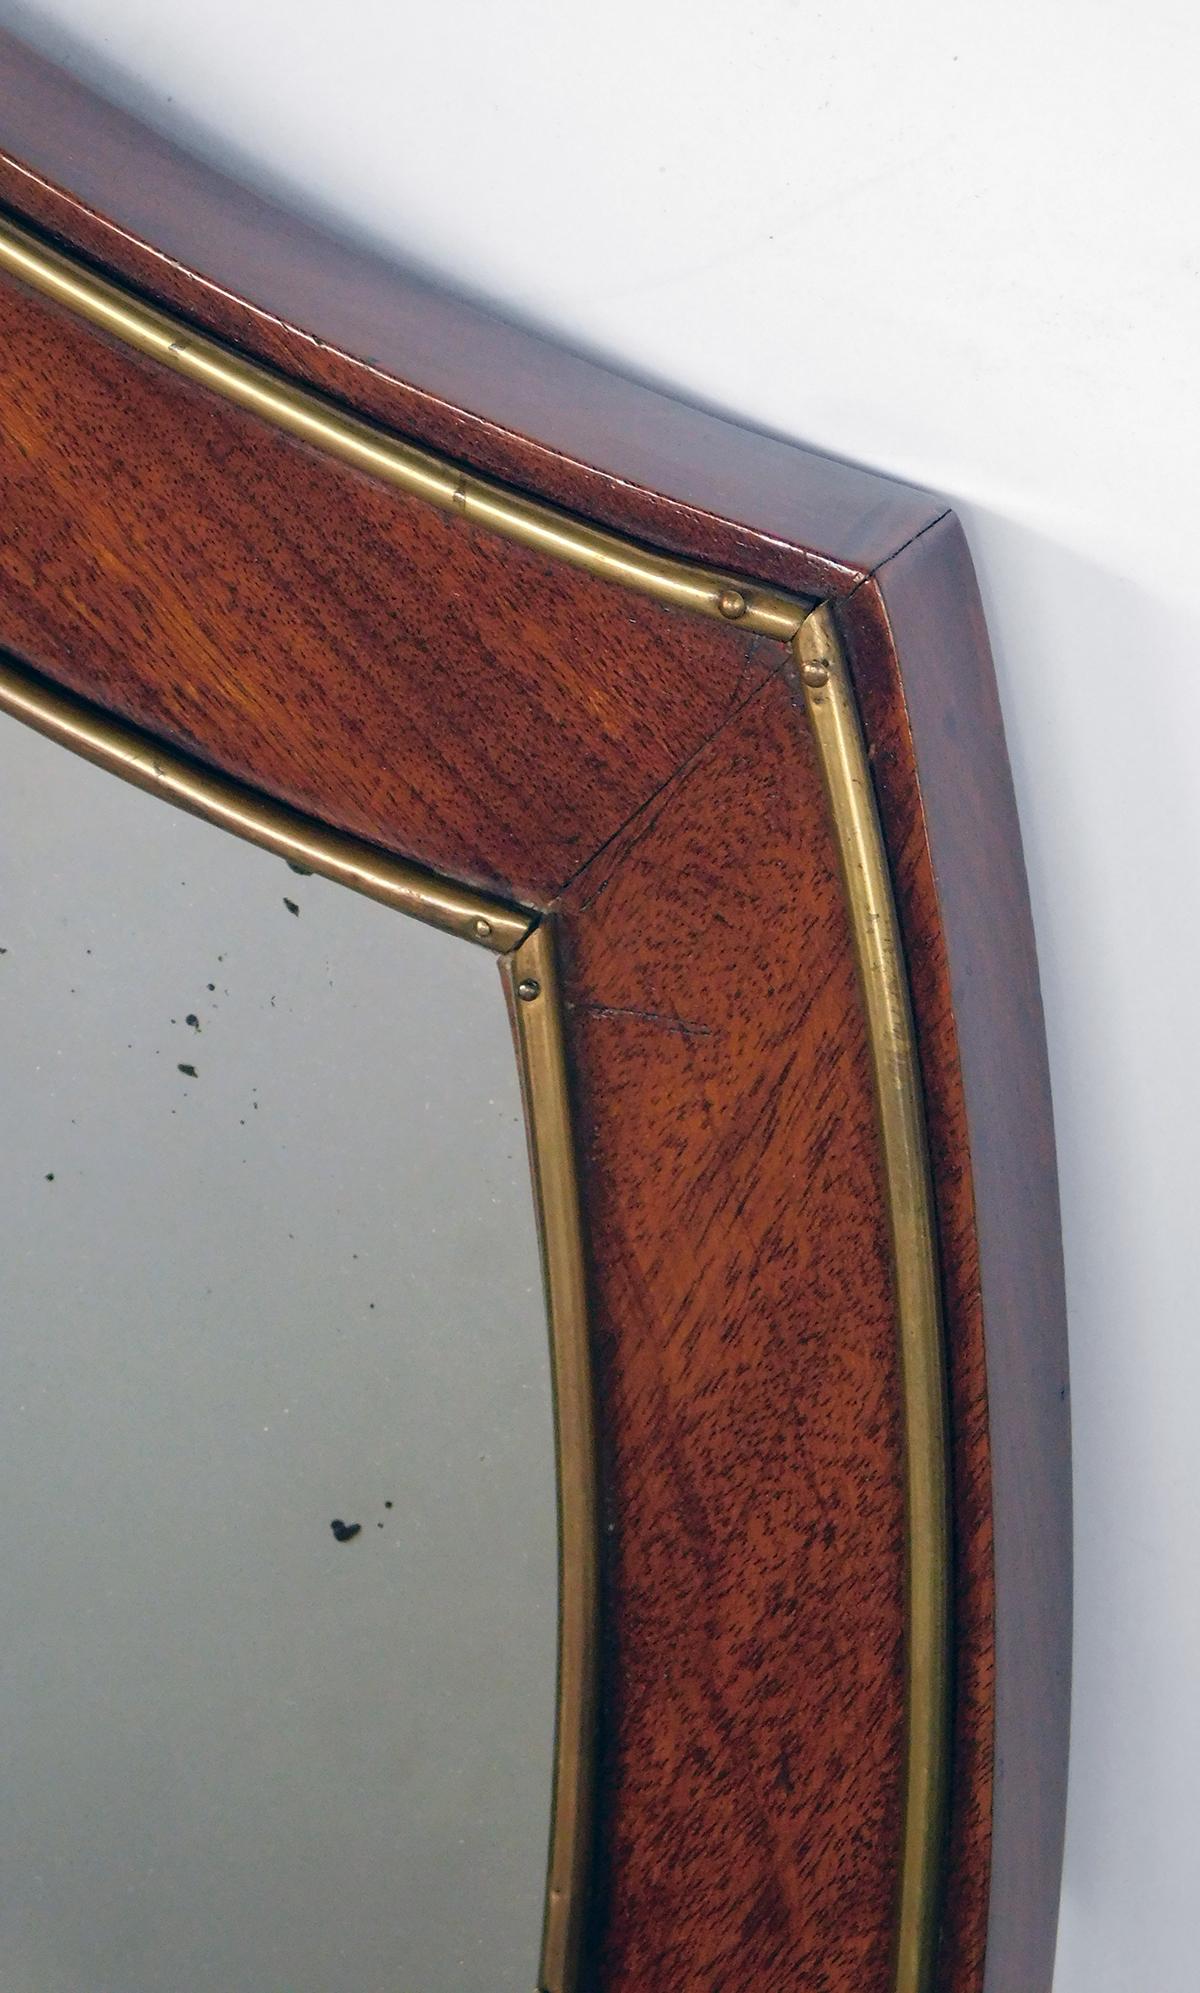 Of shield form in the neoclassical taste, the mahogany frame with applied brass decoration.